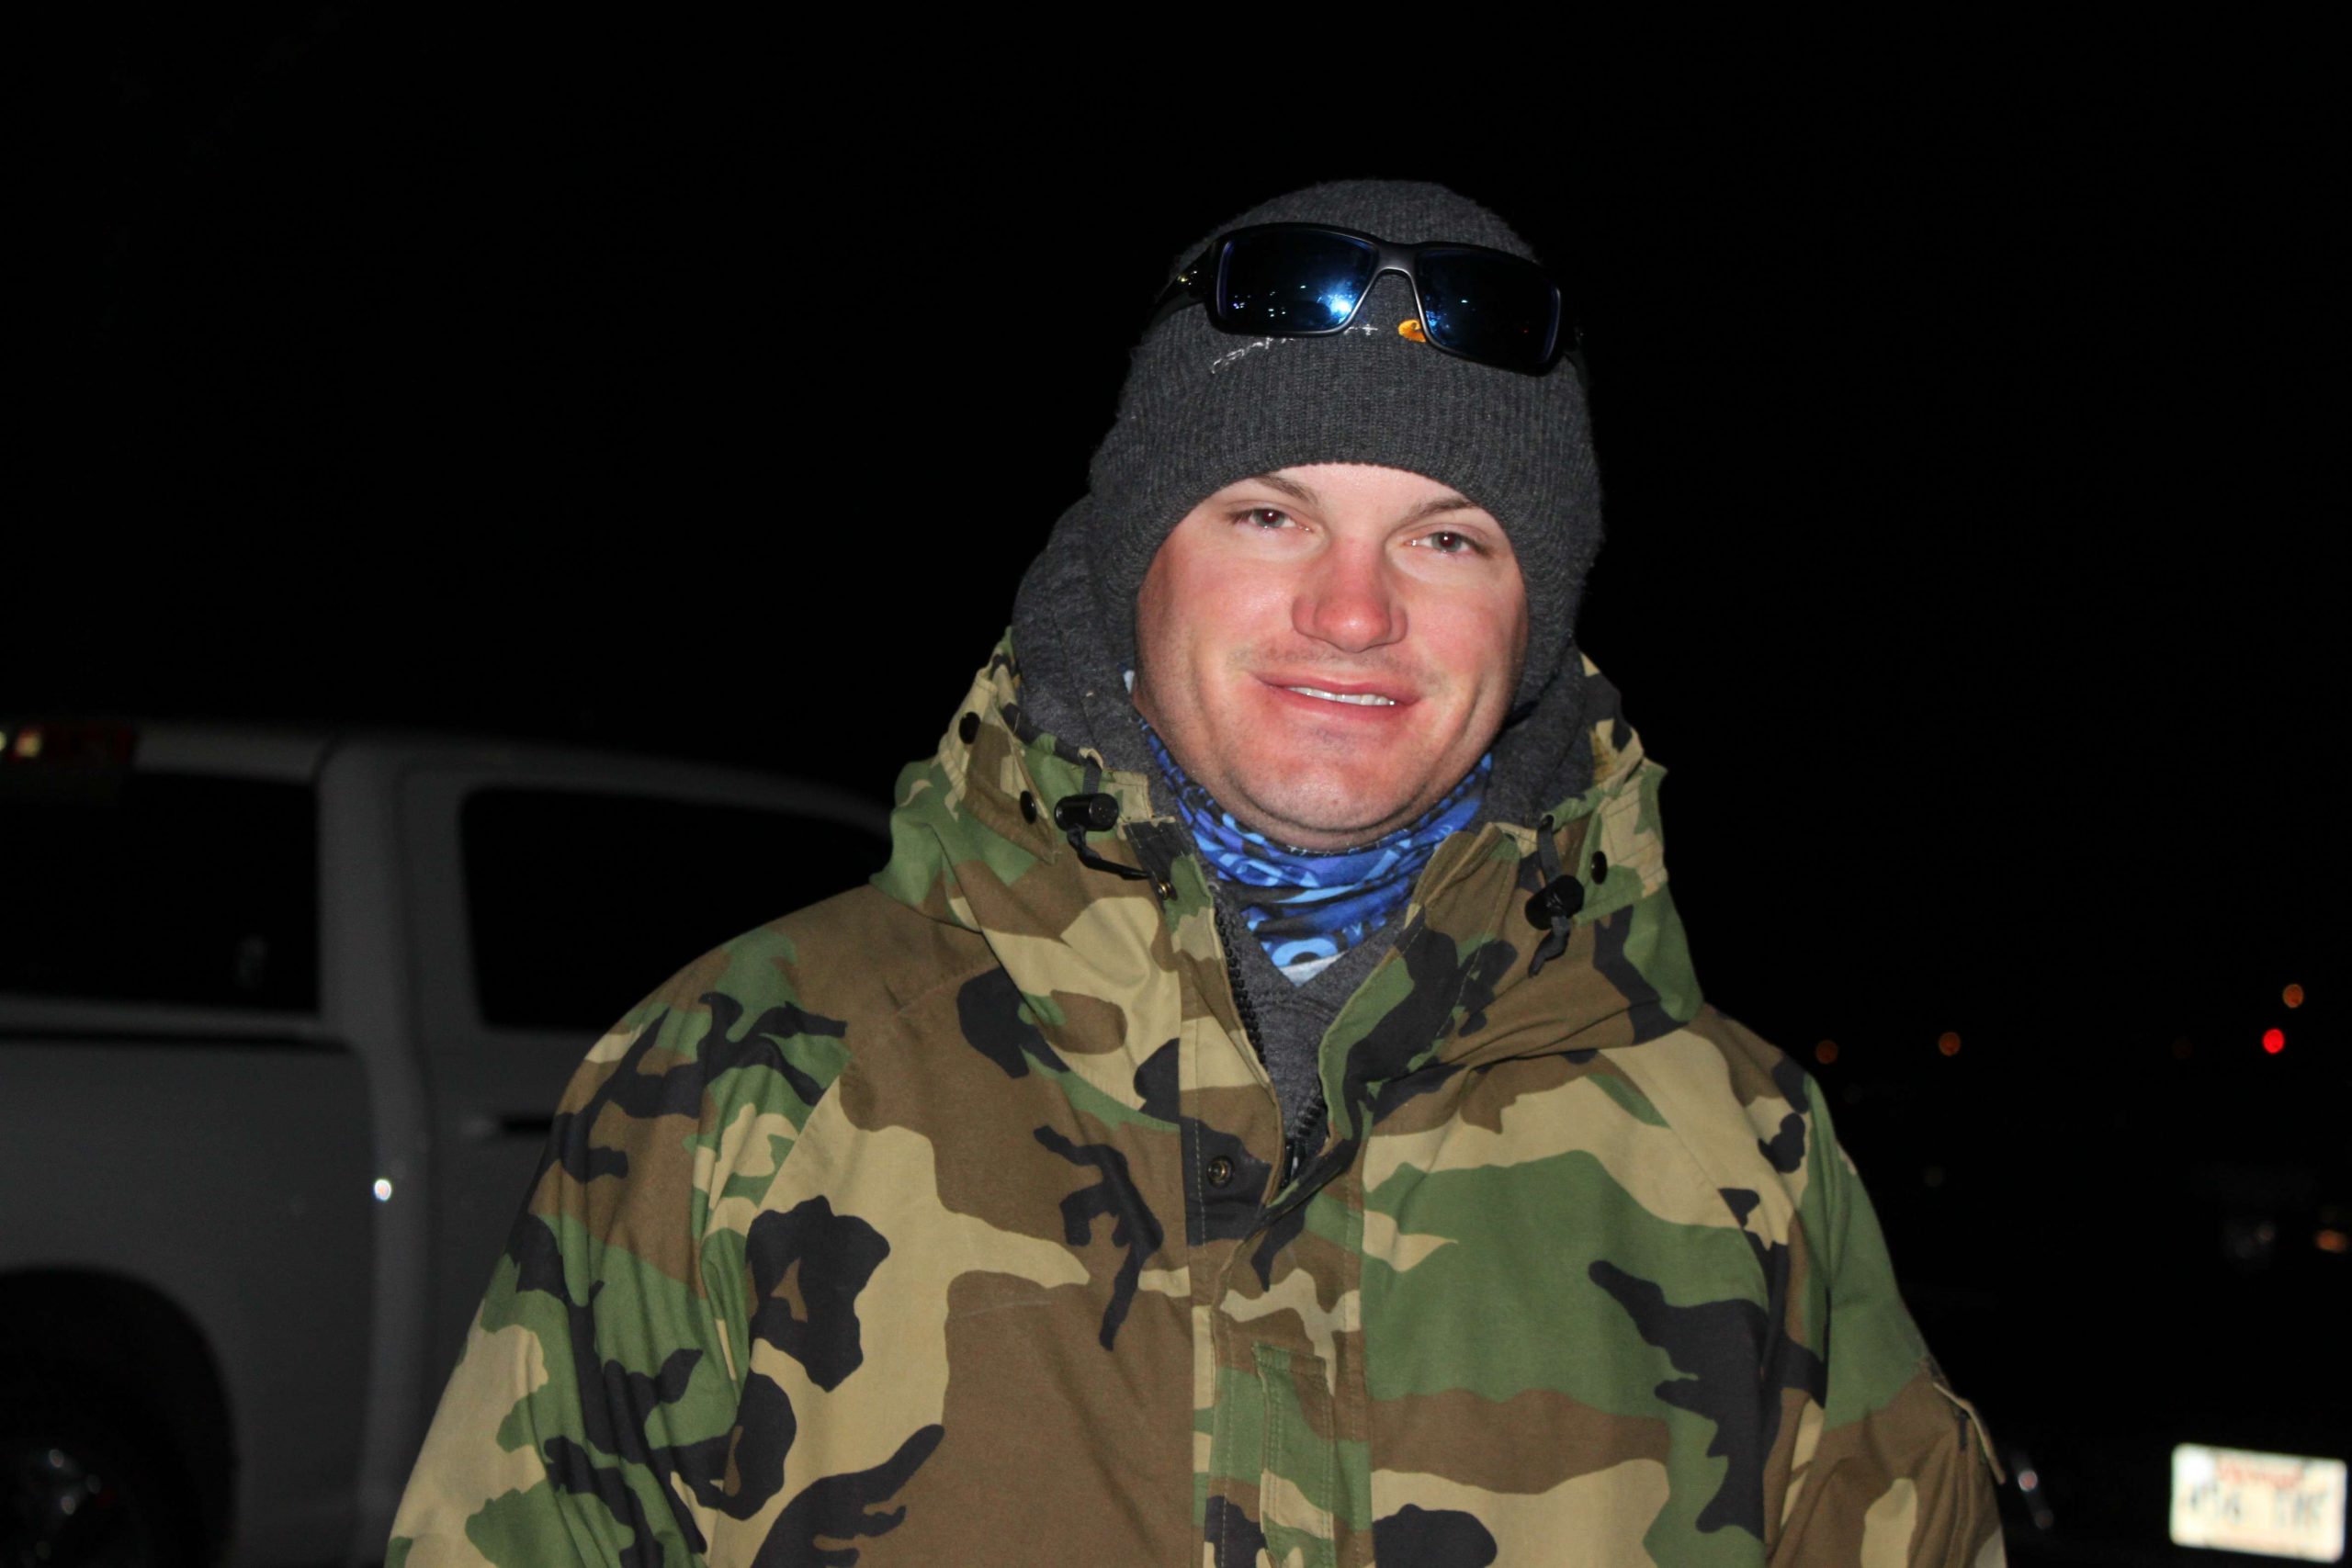 Alabama team member Travis Culbreath is all smiles in the early morning.